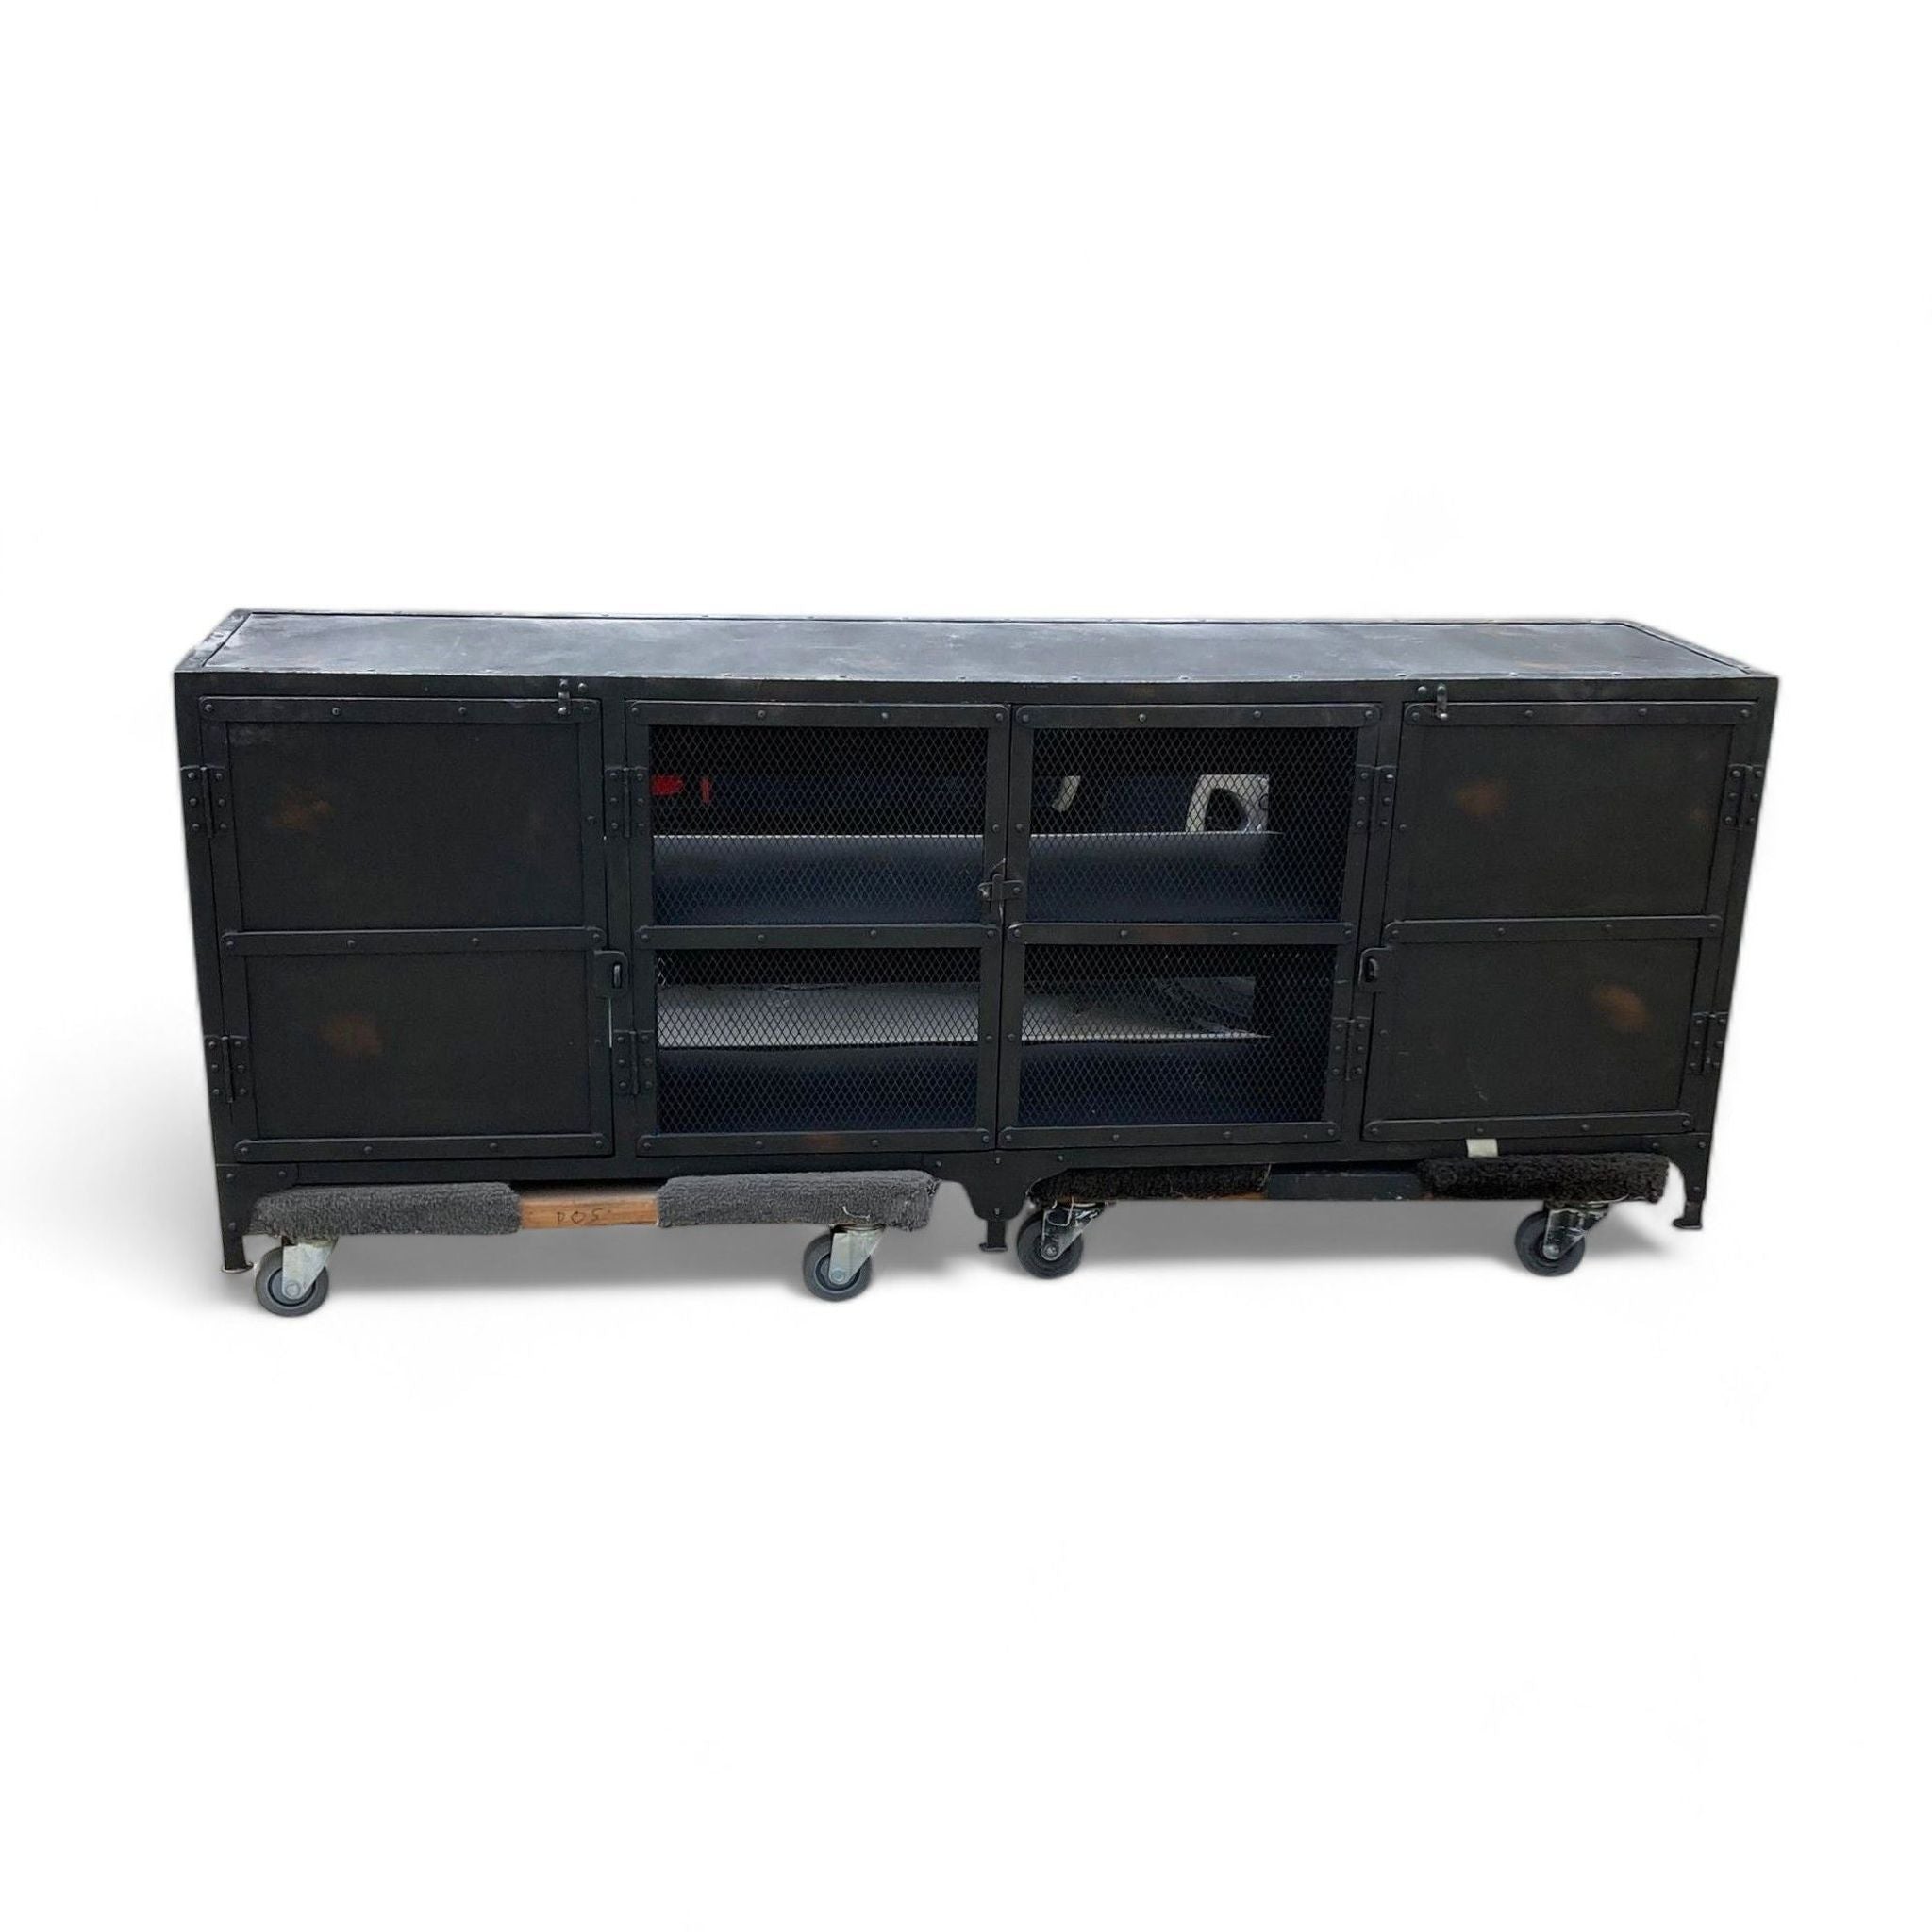 Reperch branded entertainment center with closed metal mesh cabinet doors on wheels, showcasing dark finish and industrial style.